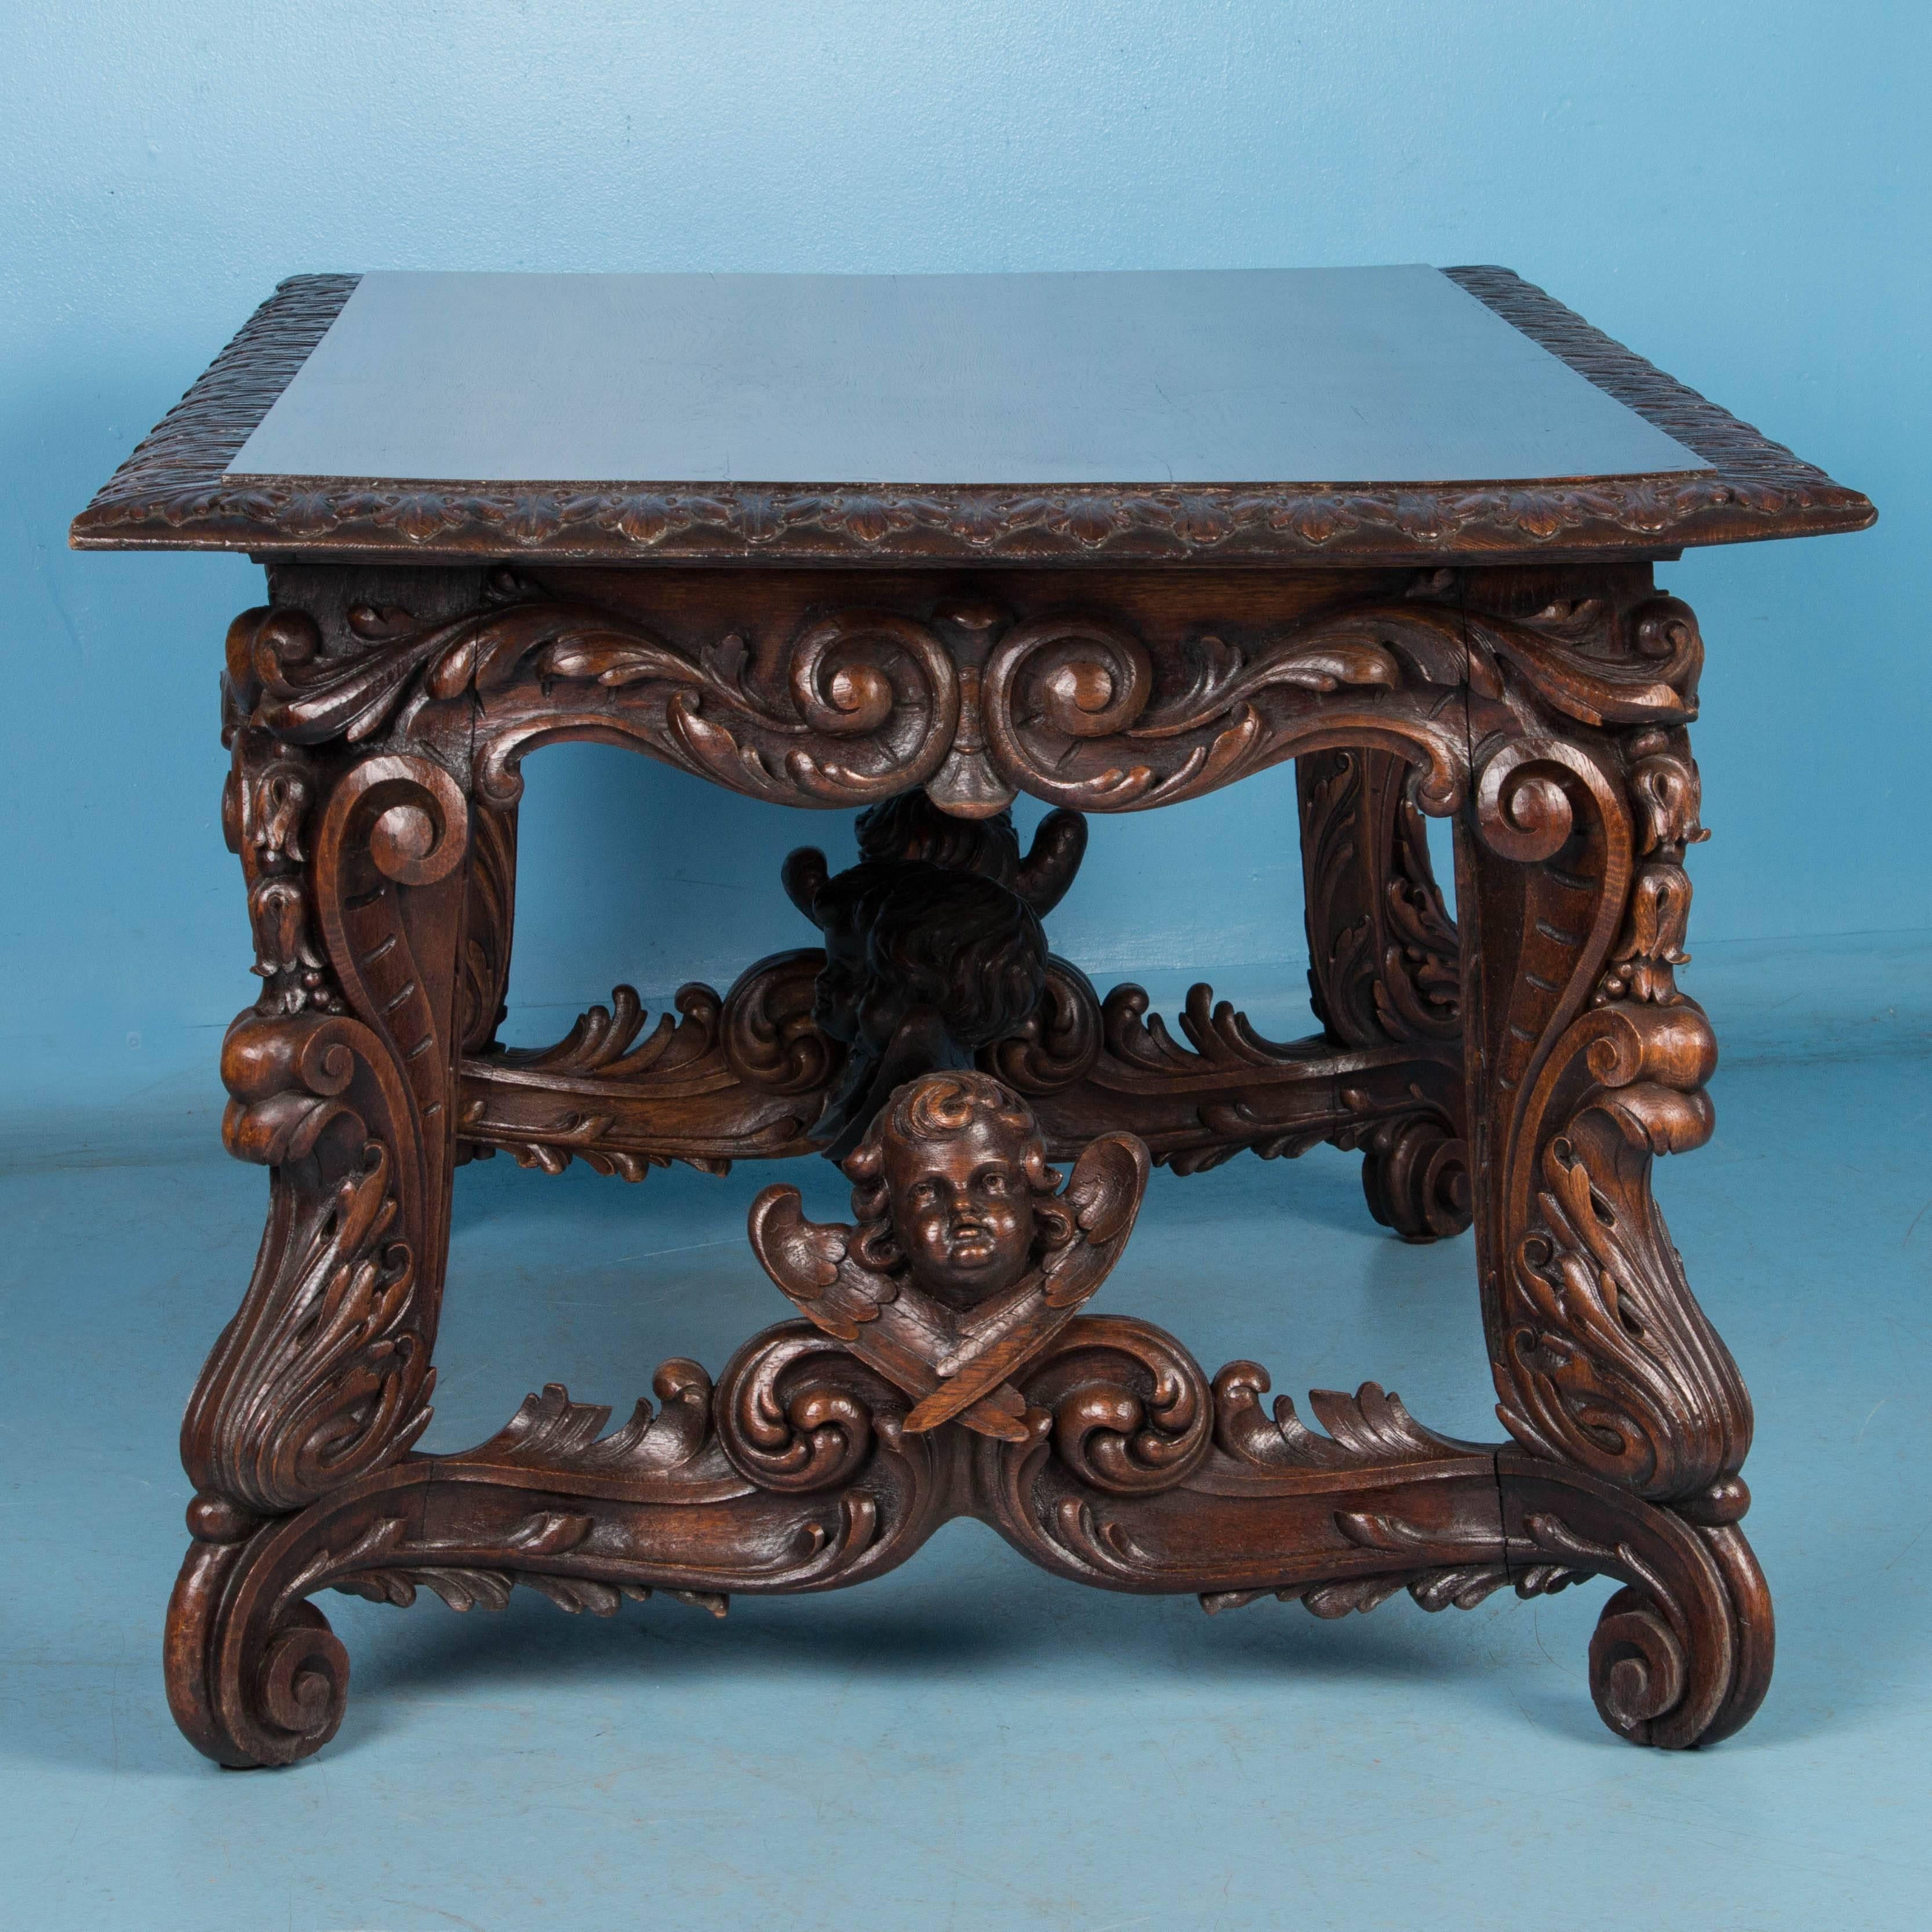 Renaissance Revival Exceptional Antique Hand-Carved French Library Table with Cherubs